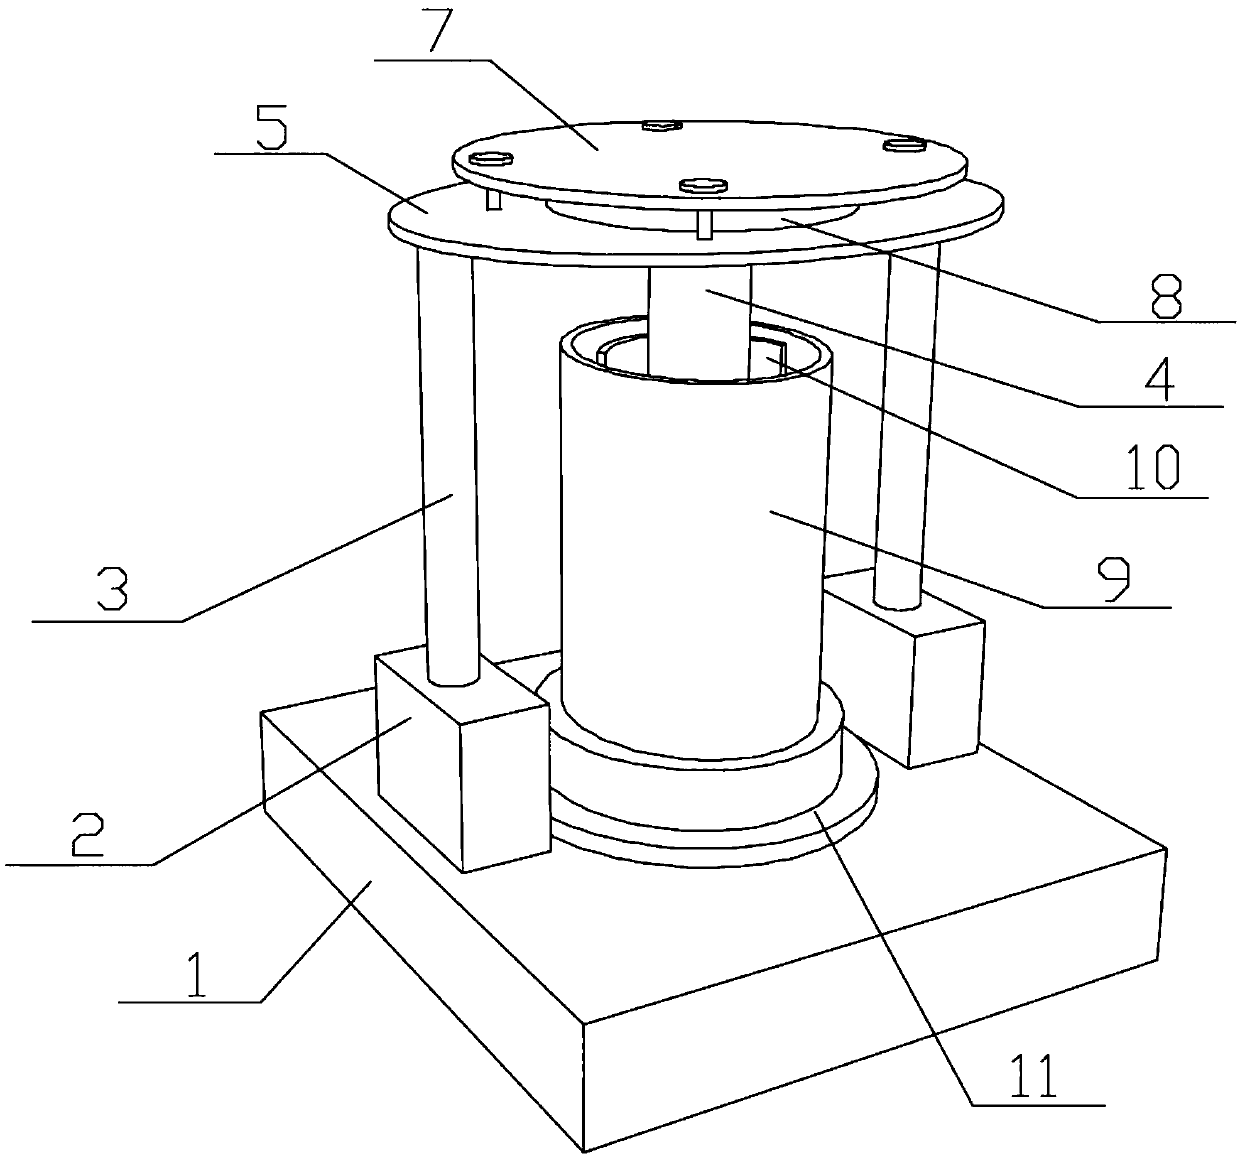 Grinding device capable of following steel nails in self-adaptive mode